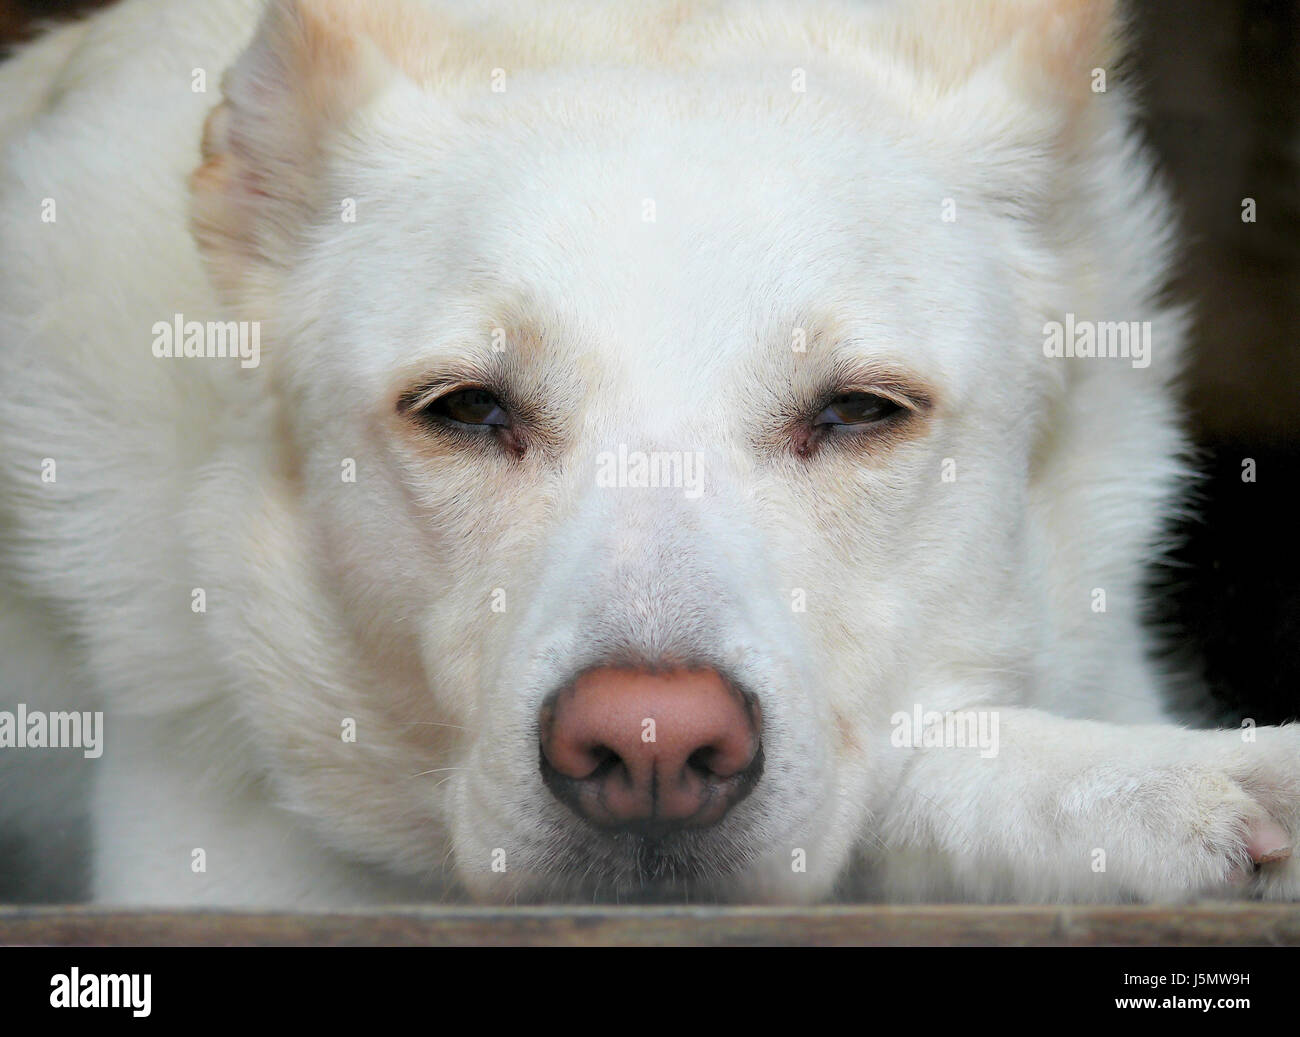 animal pet eyes ears skin dog dogs golden faithful beige look at cute watching Stock Photo